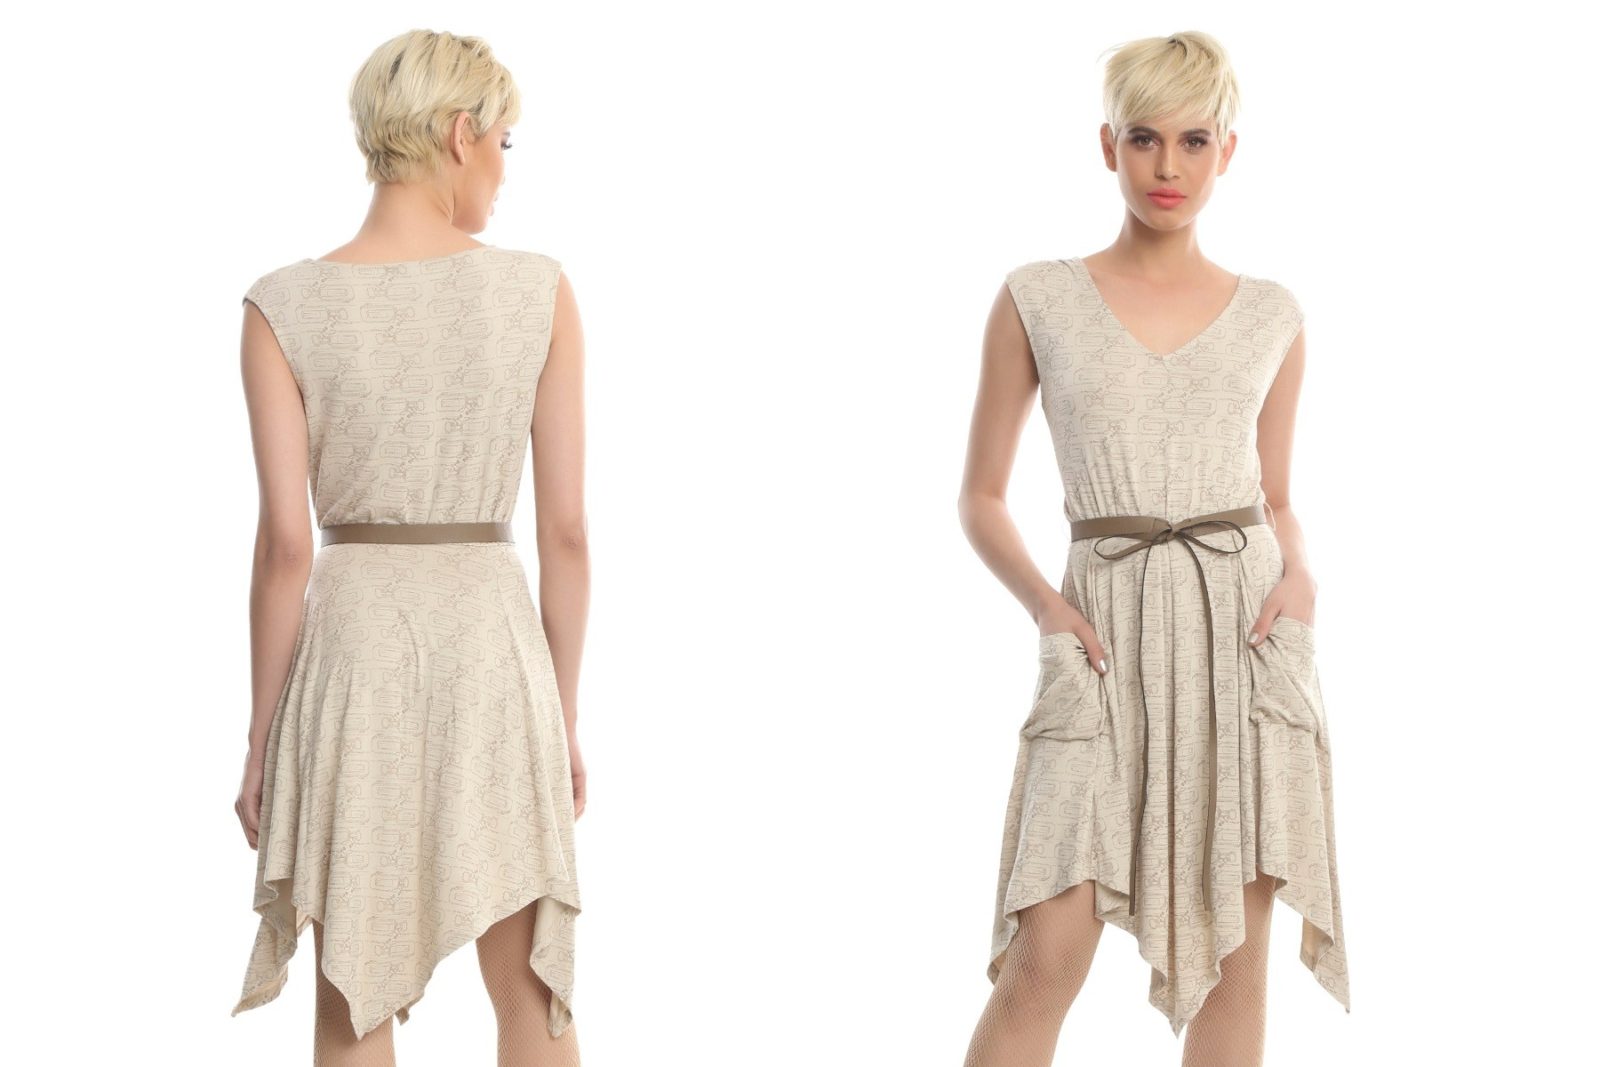 Her Universe Rey dress now available!